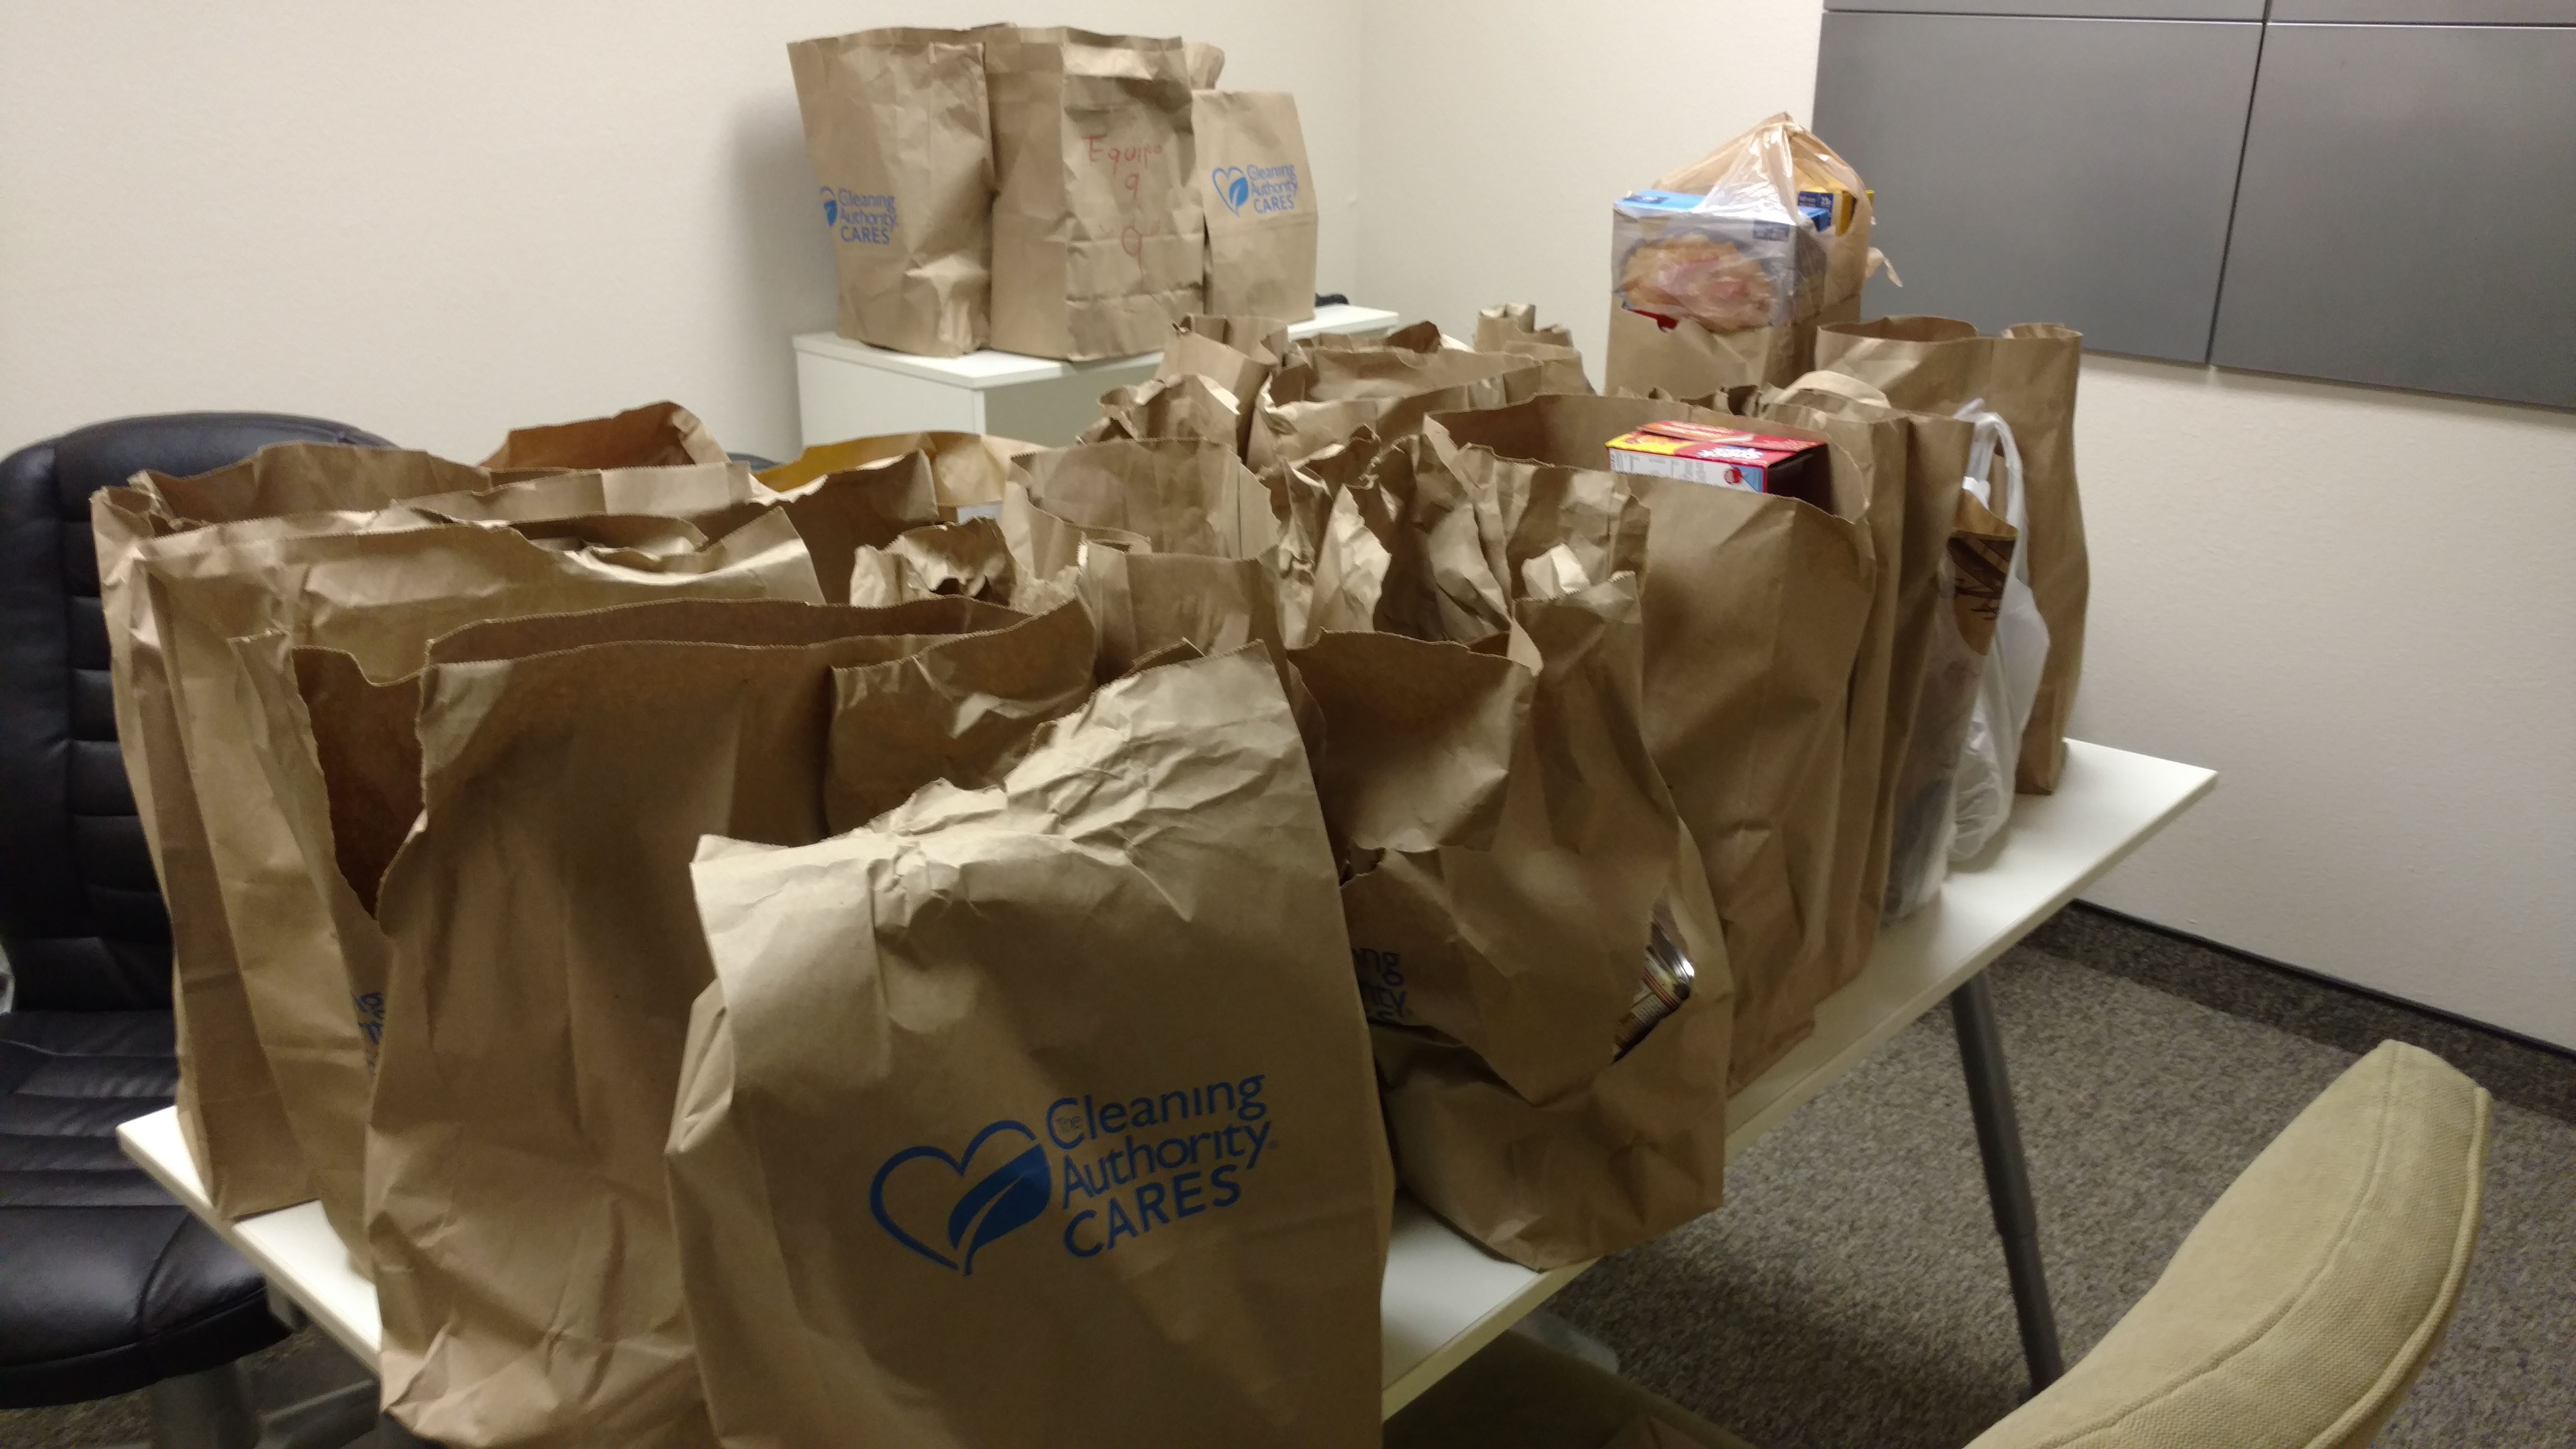 Paper bags full of donations collected by the TCA Irvine team are on a white table.